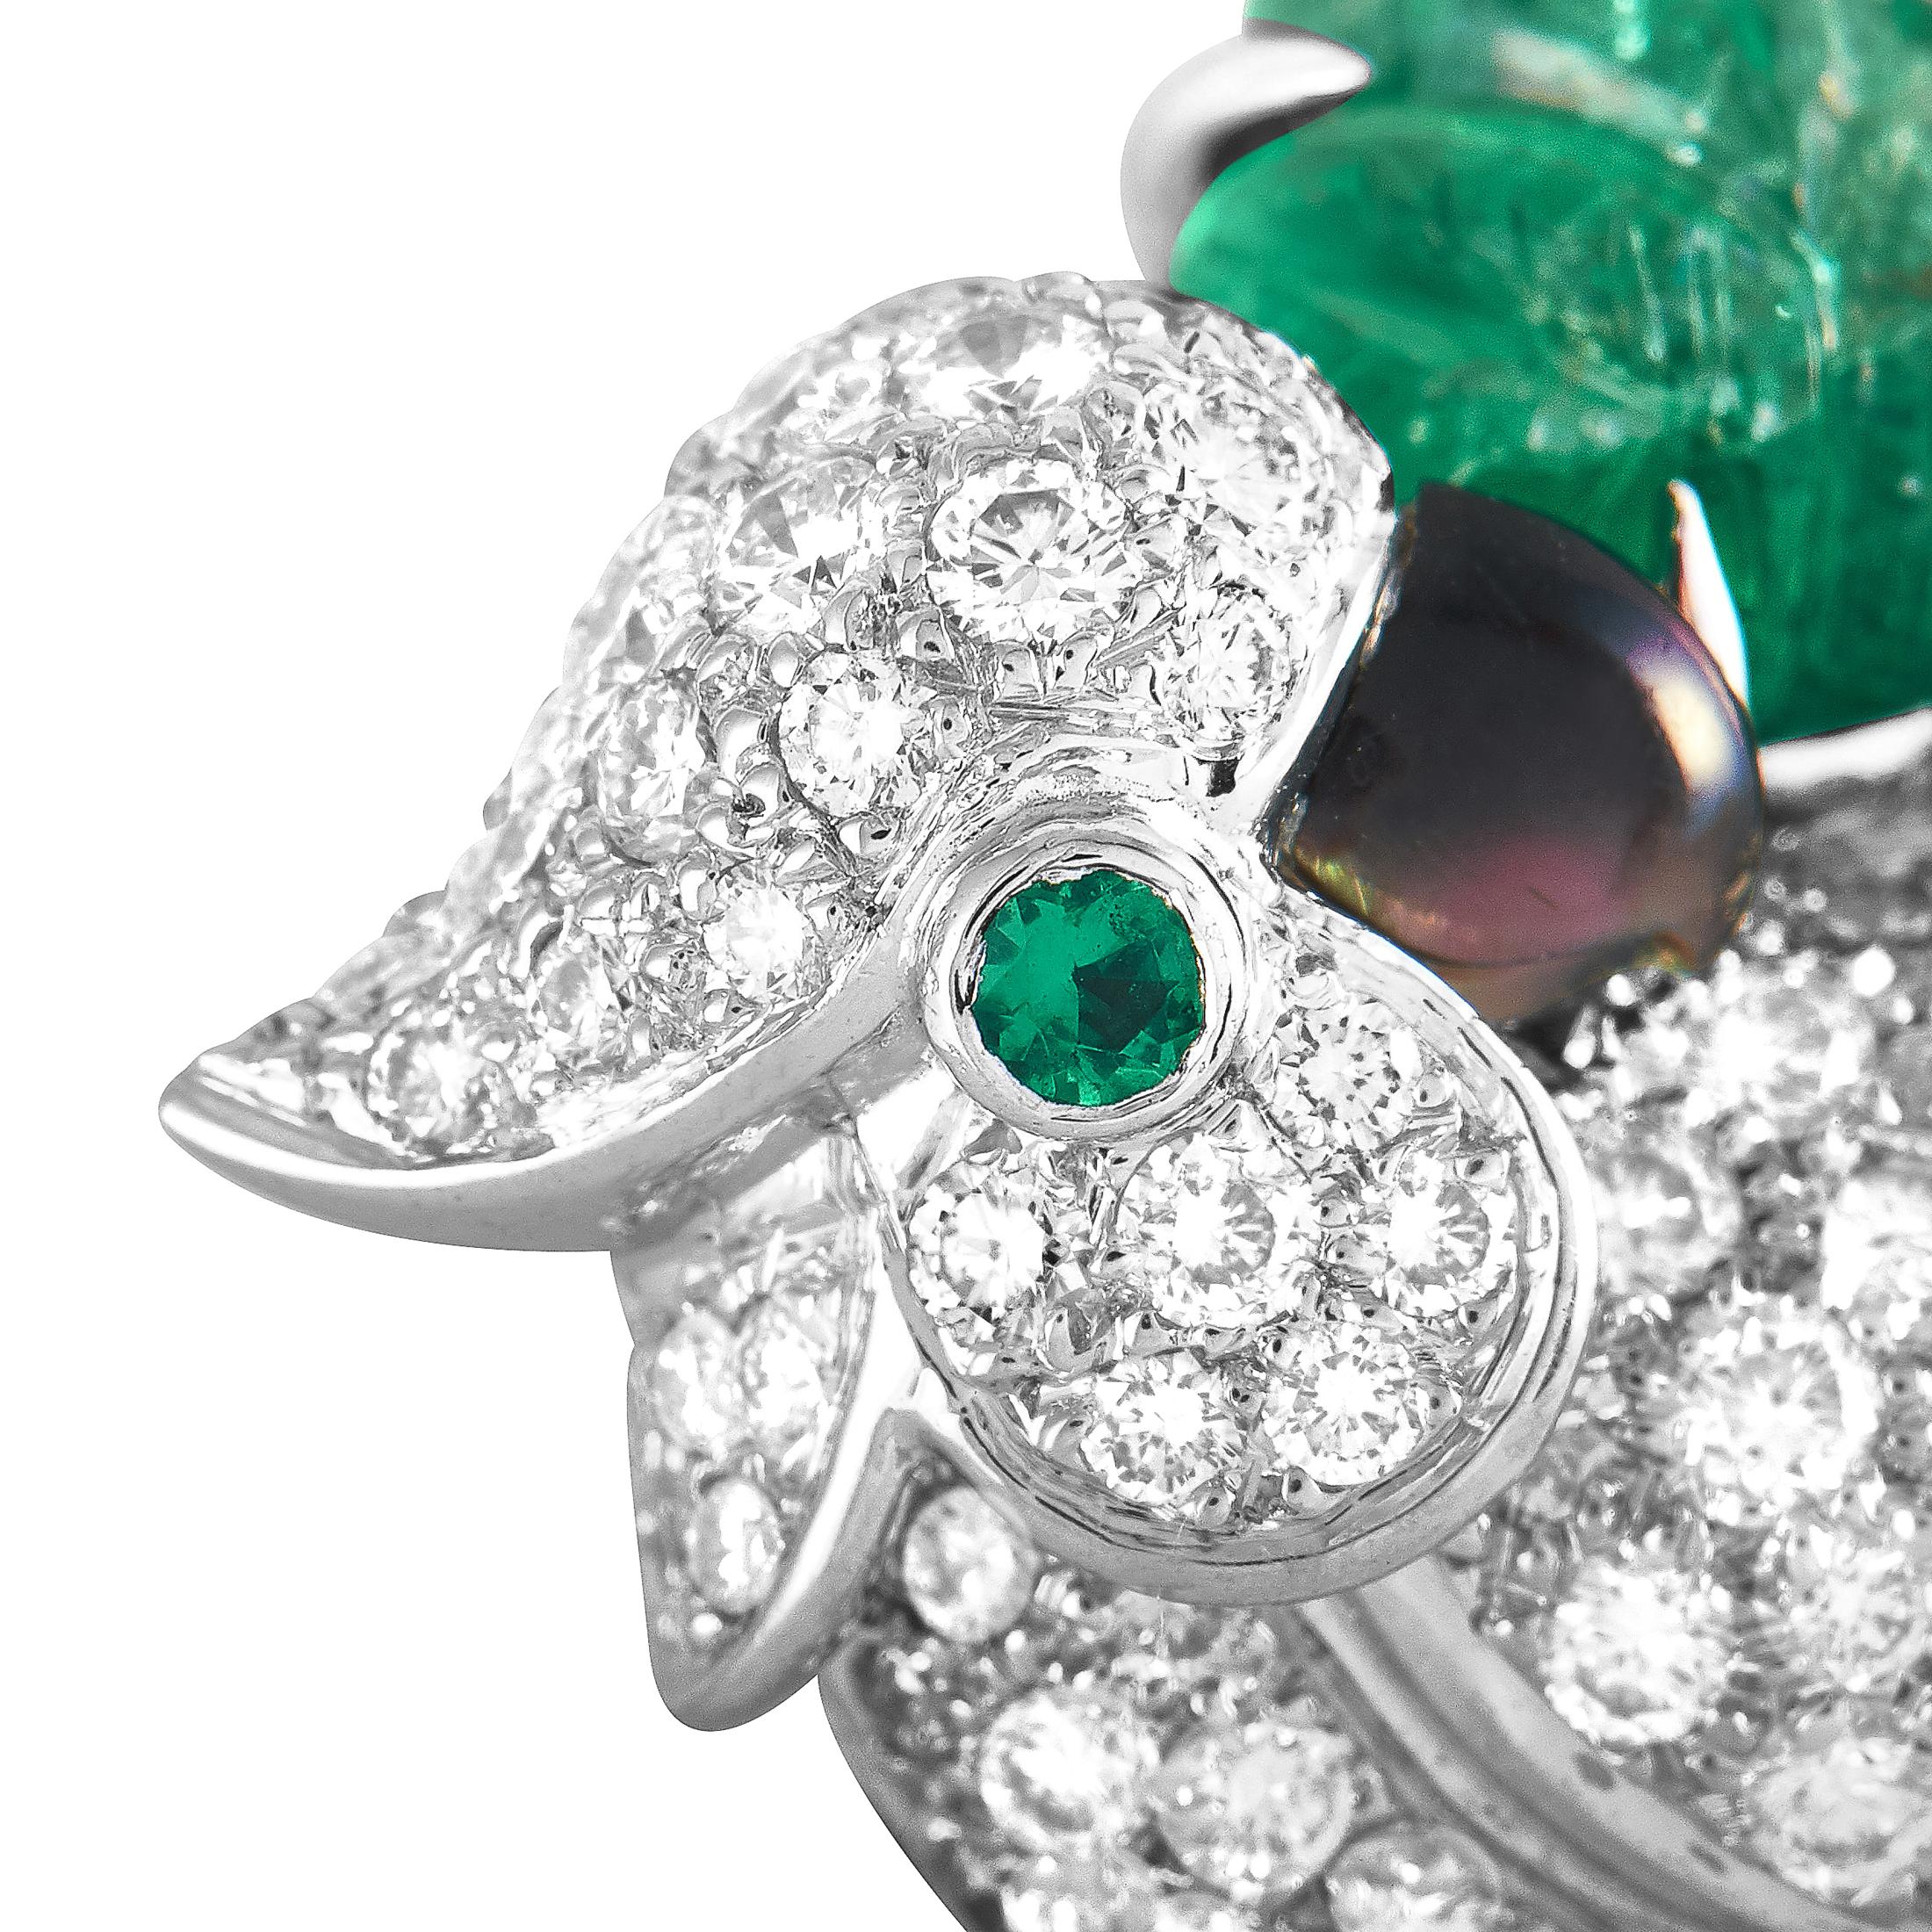 This Cartier bird pendant is crafted from 18K white gold and embellished with diamond, emerald and sapphire stones. The pendant weighs 8 grams and measures 1” in length and 0.70” in width.

Offered in estate condition, this item includes the